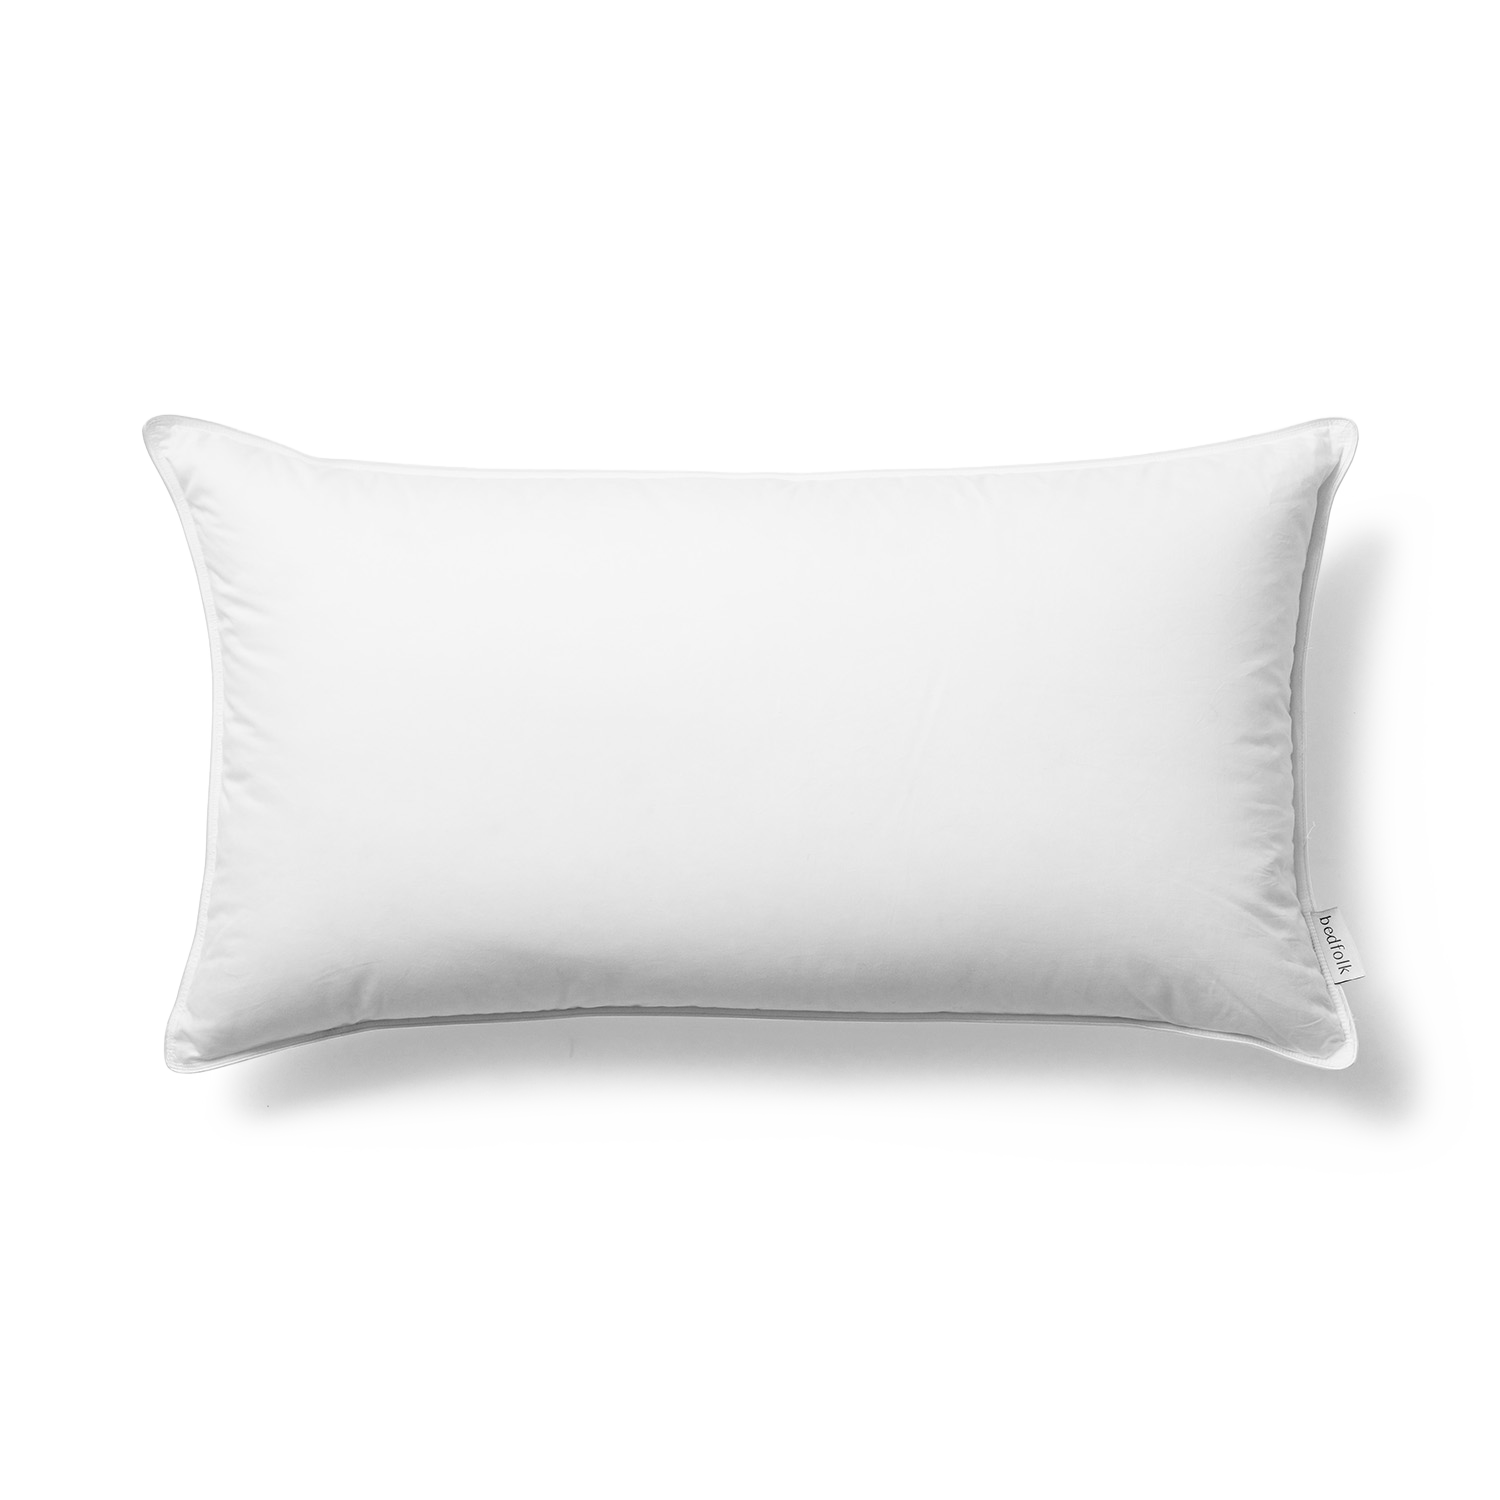 The Down Pillow